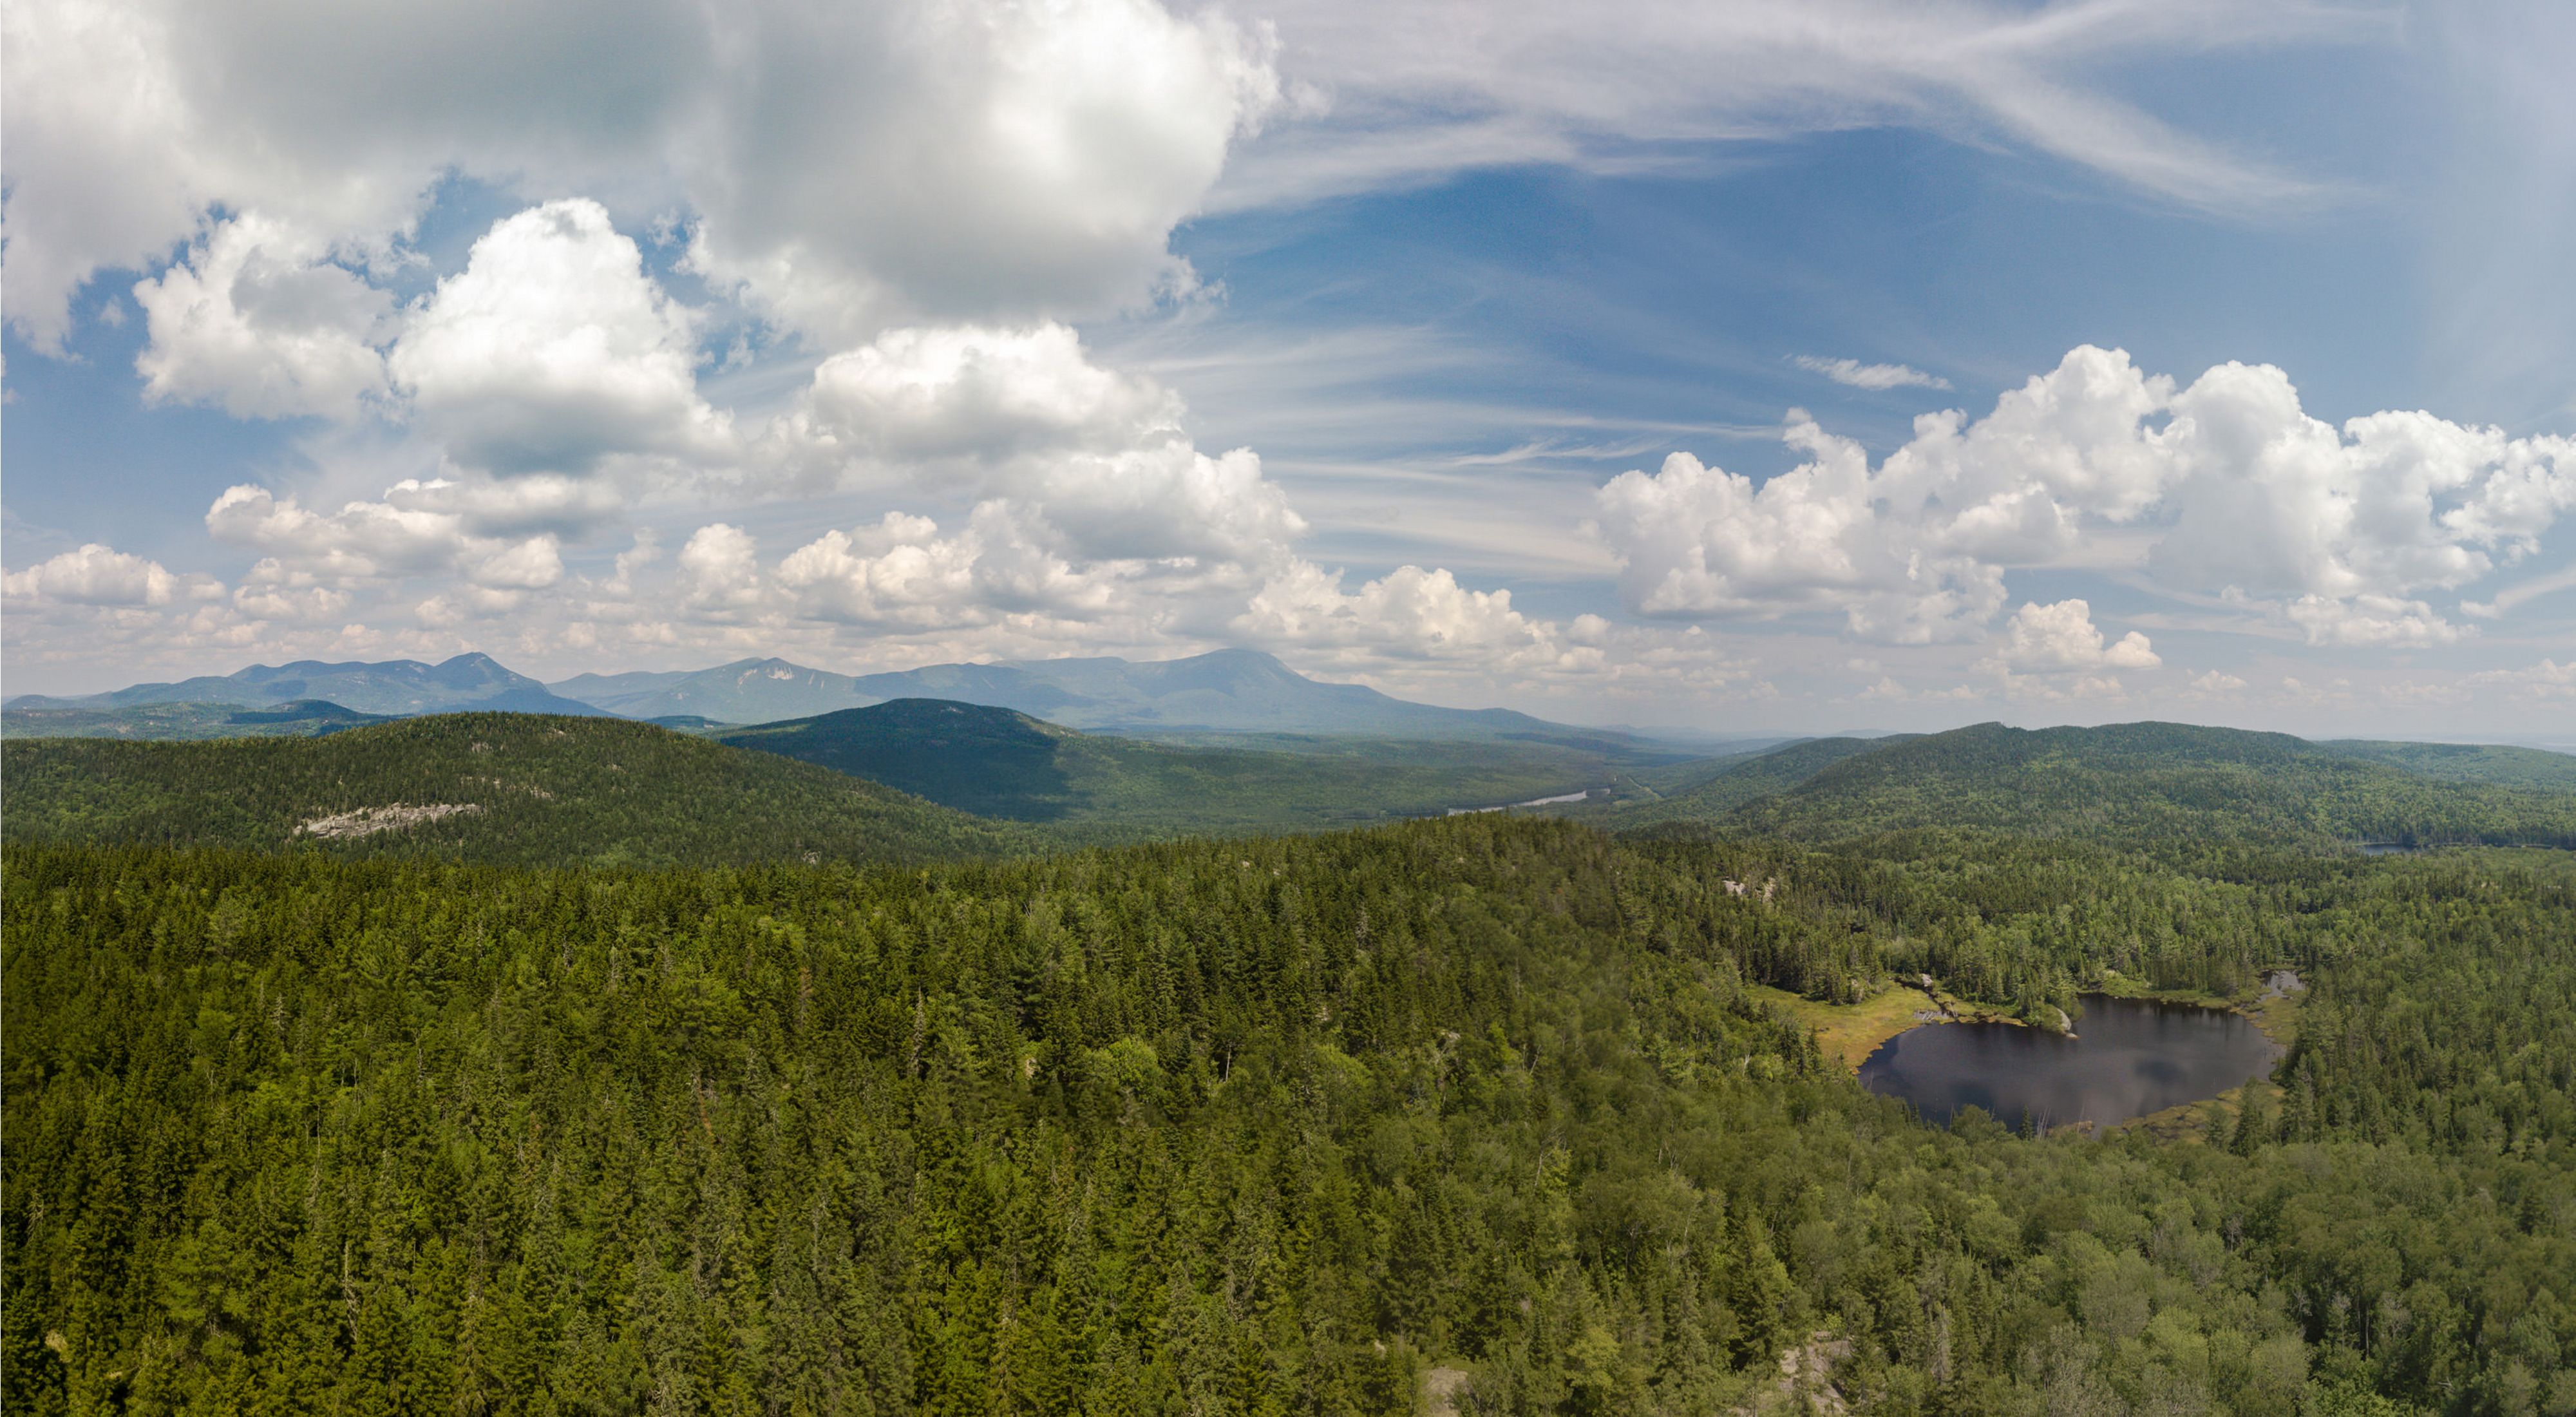 A view of a vast landscape of mountains surrounded by forest.